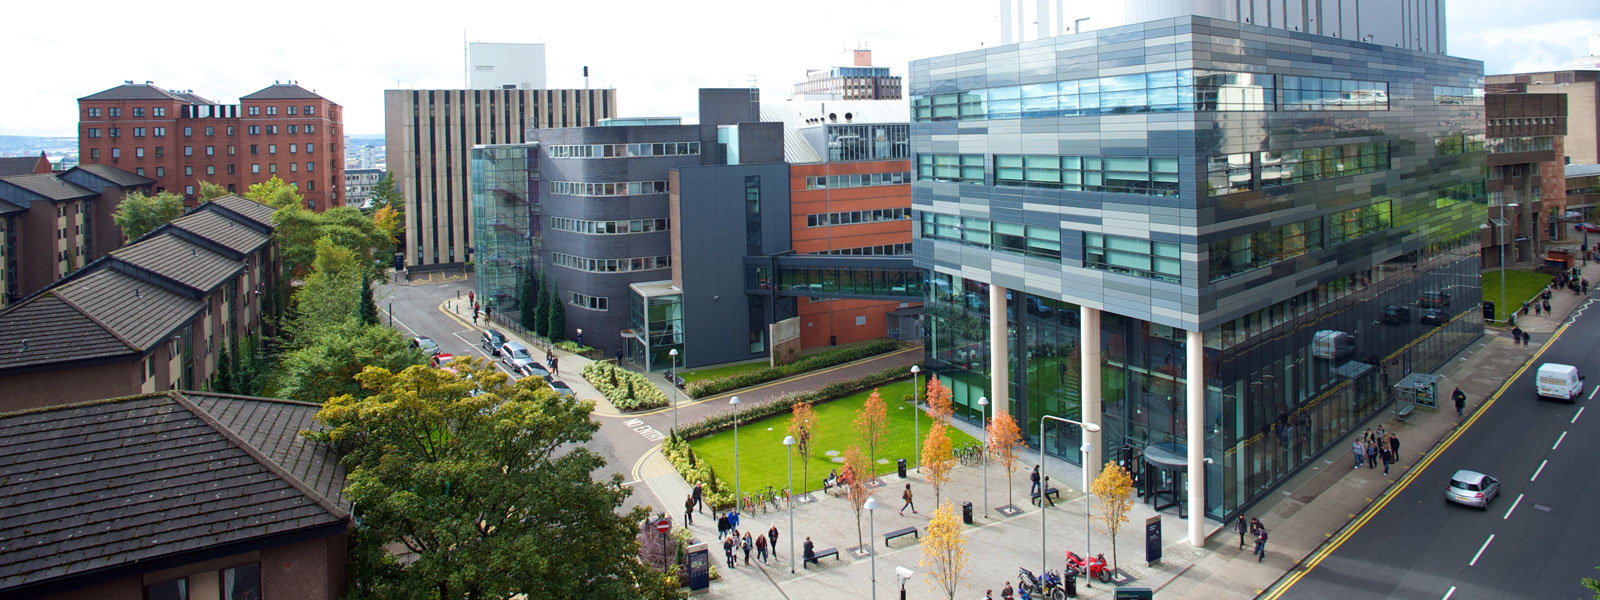 University of Strathclyde, ISC